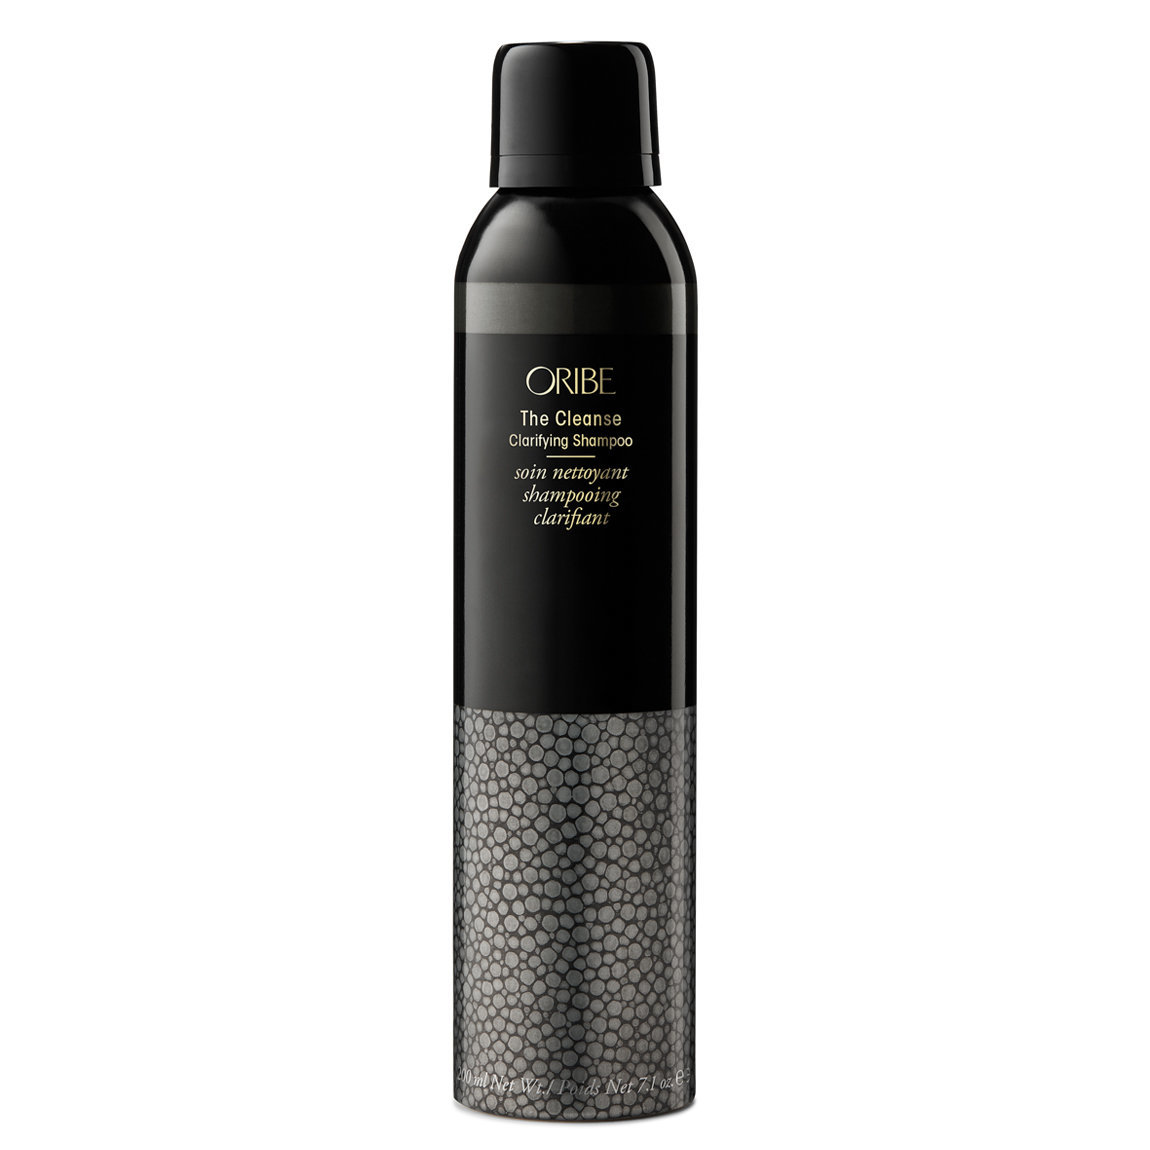 Oribe The Cleanse Clarifying Shampoo alternative view 1 - product swatch.